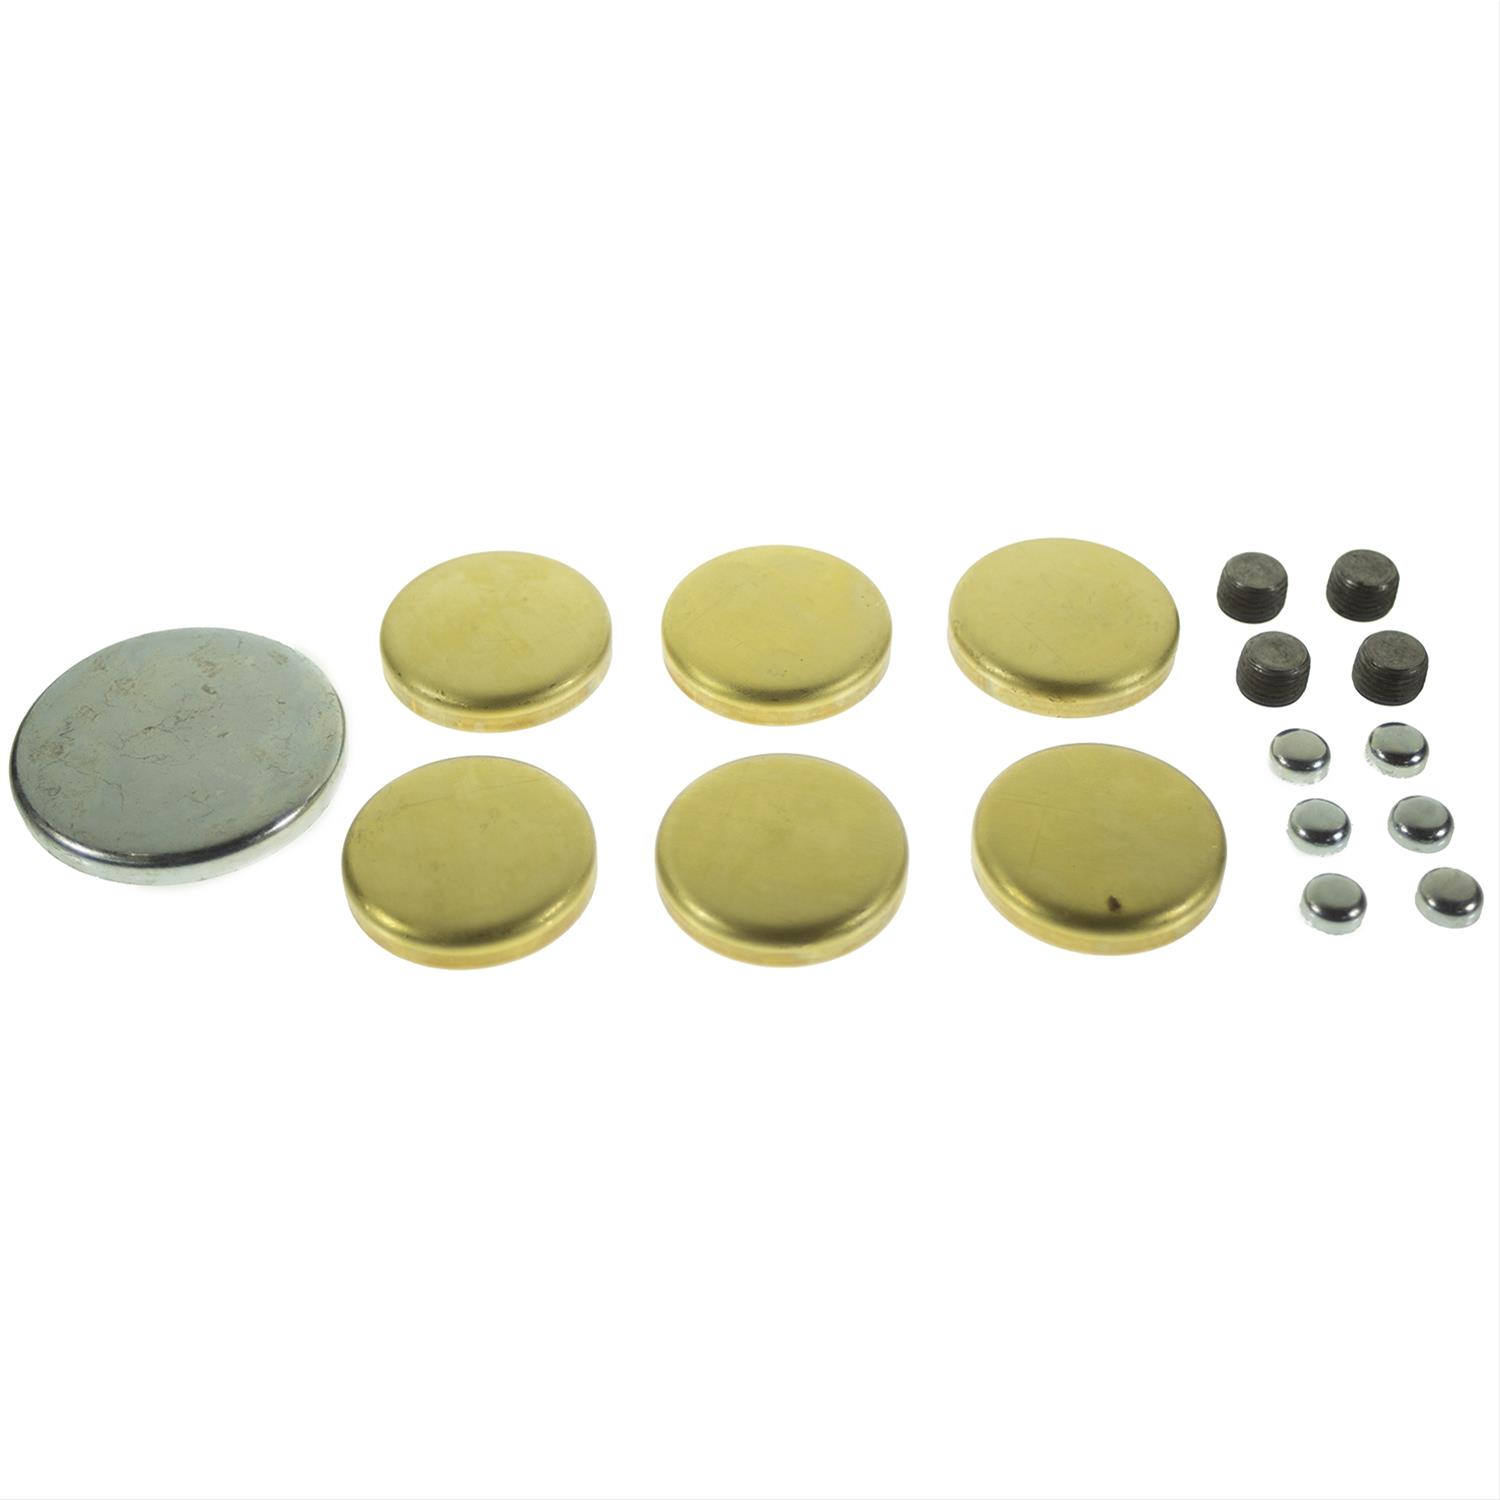 Melling MEP-15B BRASS 1-3/4" Engine Freeze Out Expansion Convex Disc Type Plugs